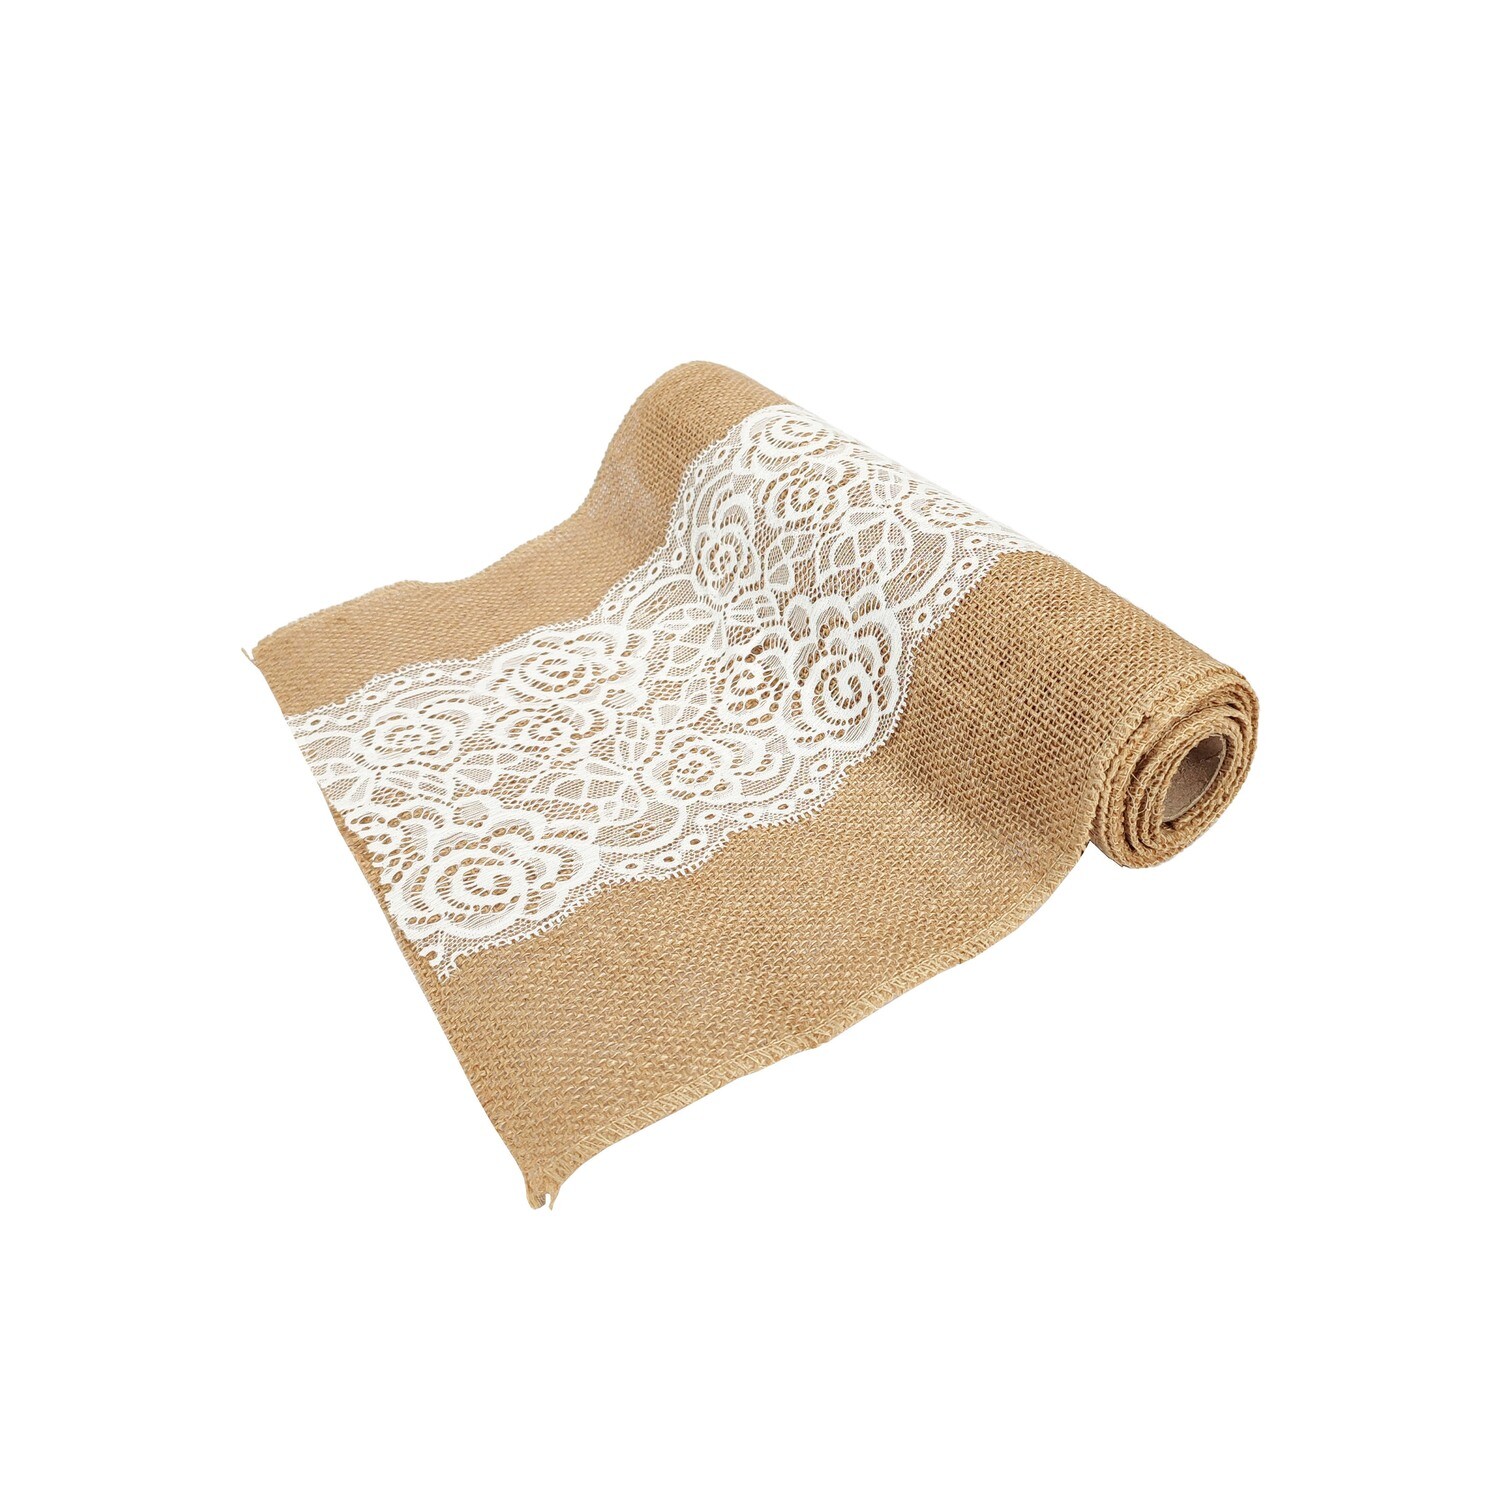 Hessian Table Cloth With Lace